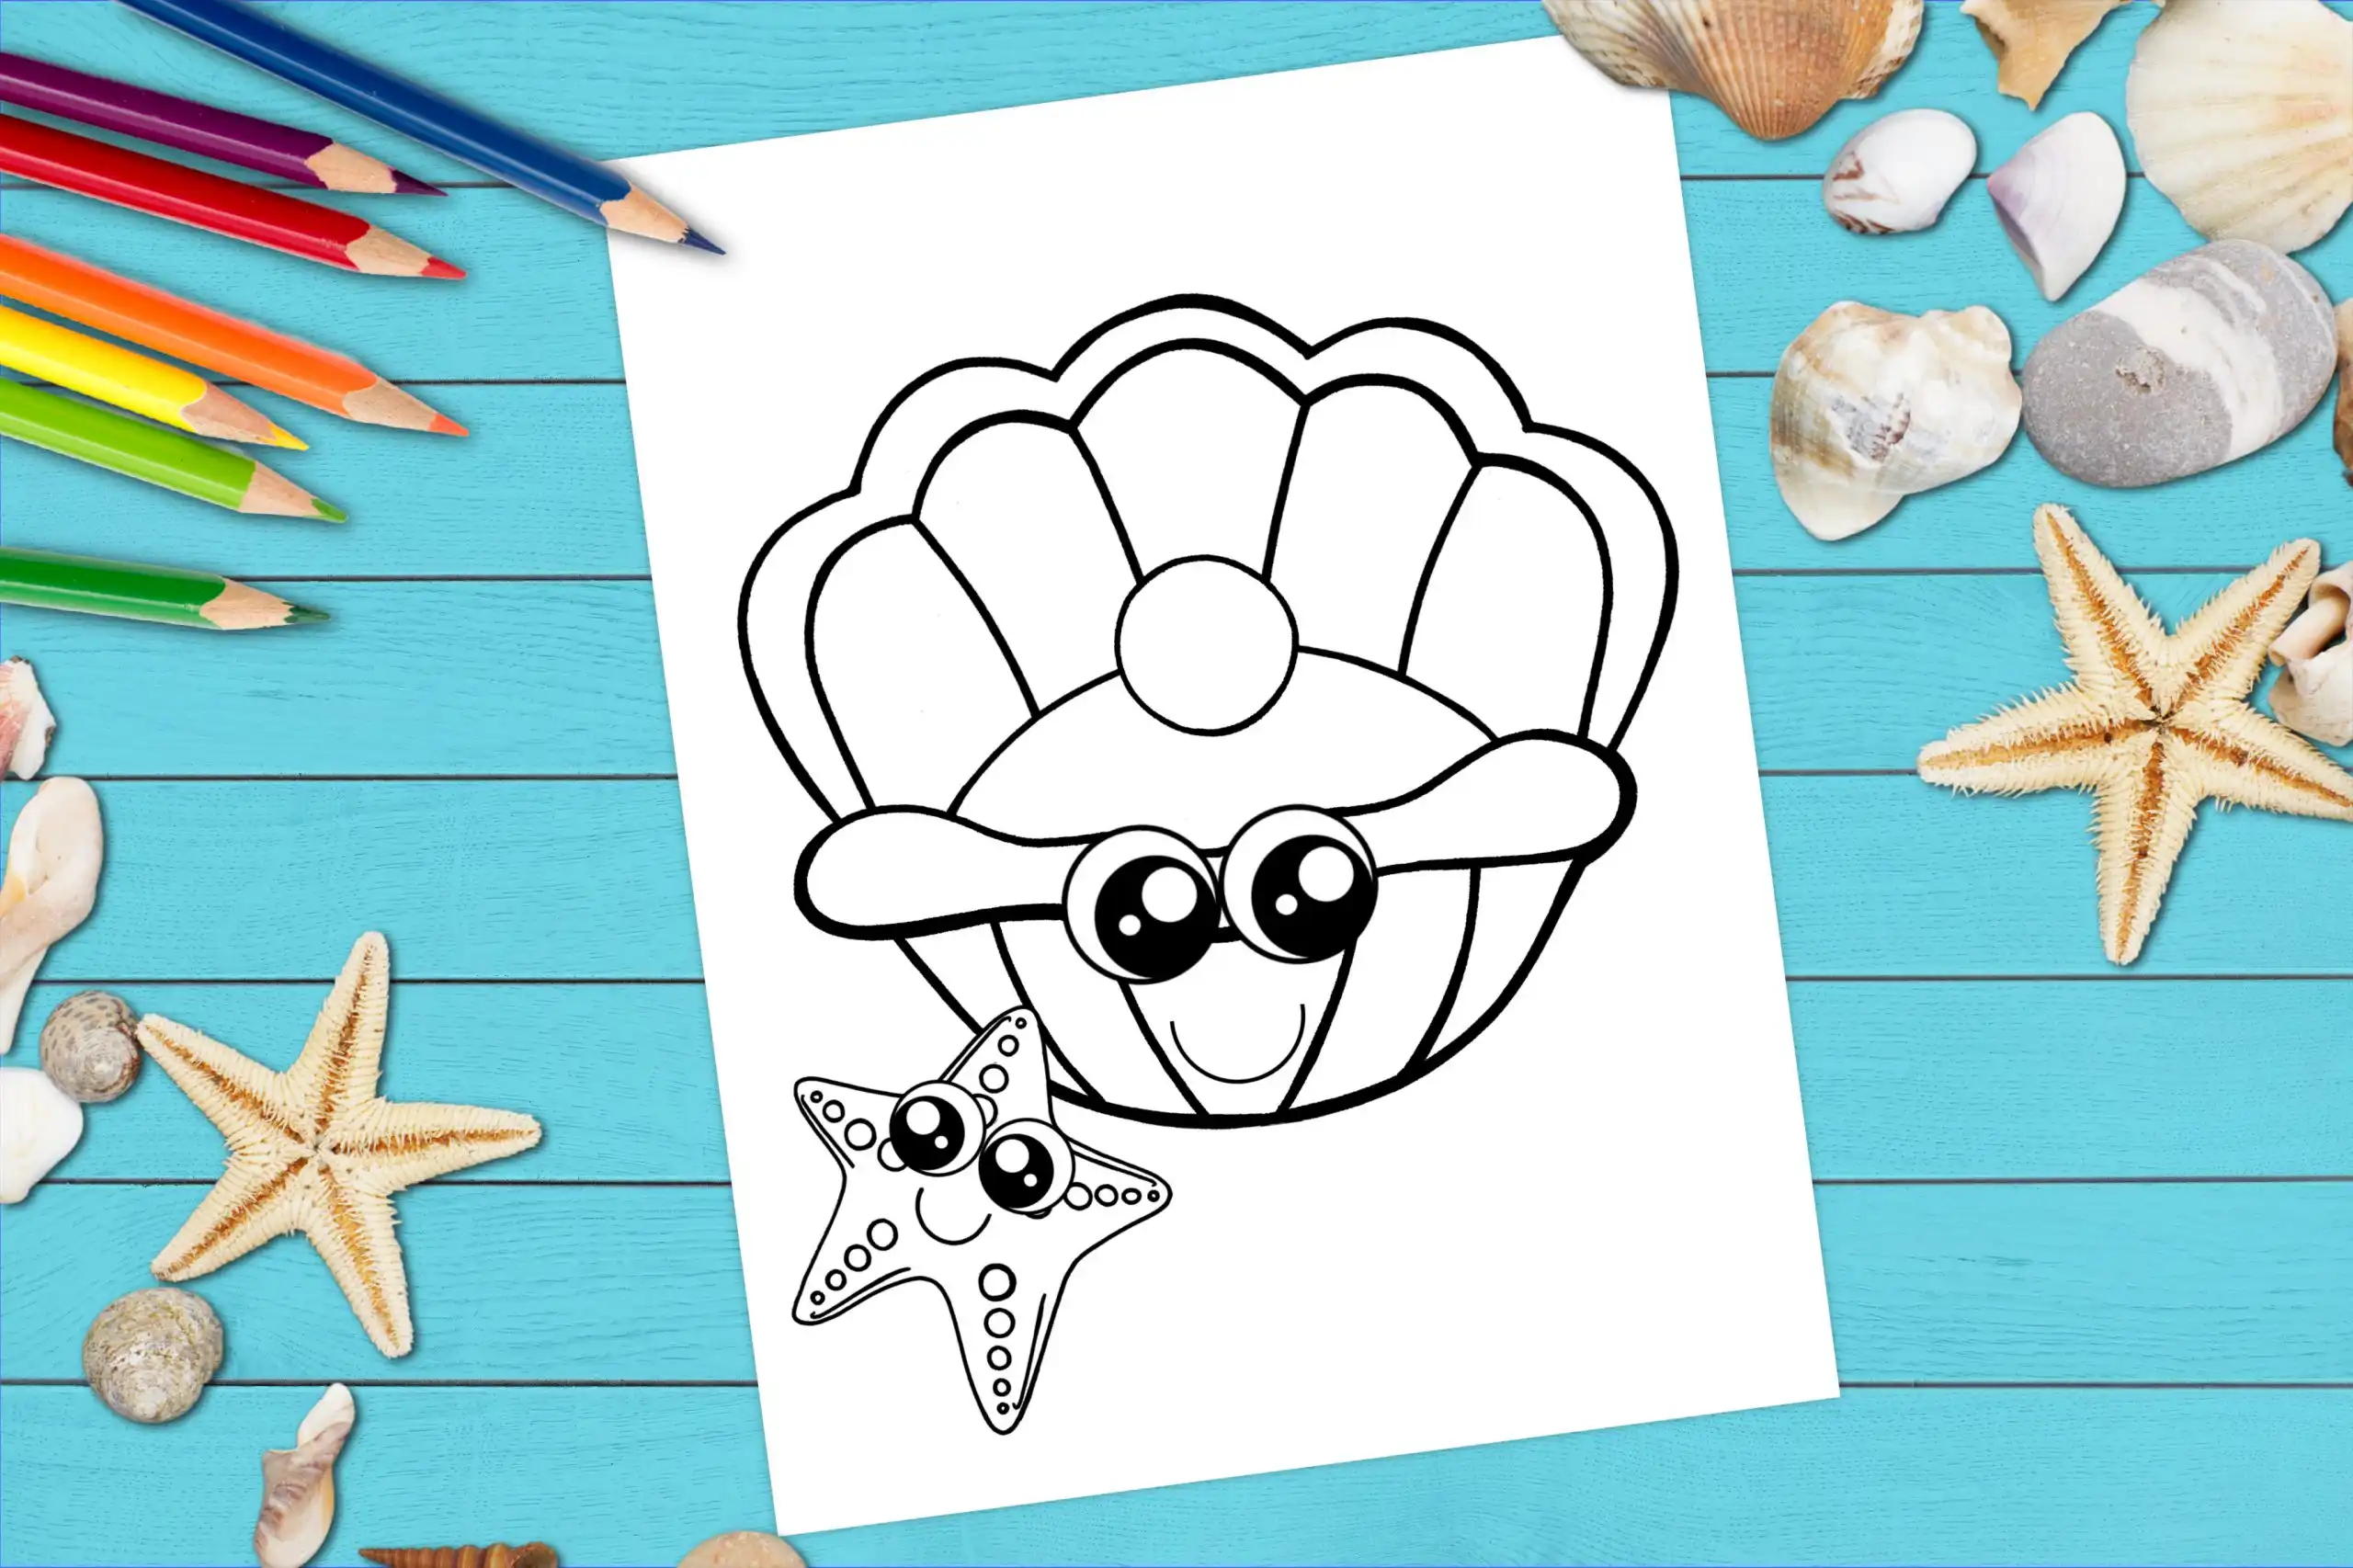 Free printable clam shell coloring page â simple mom project